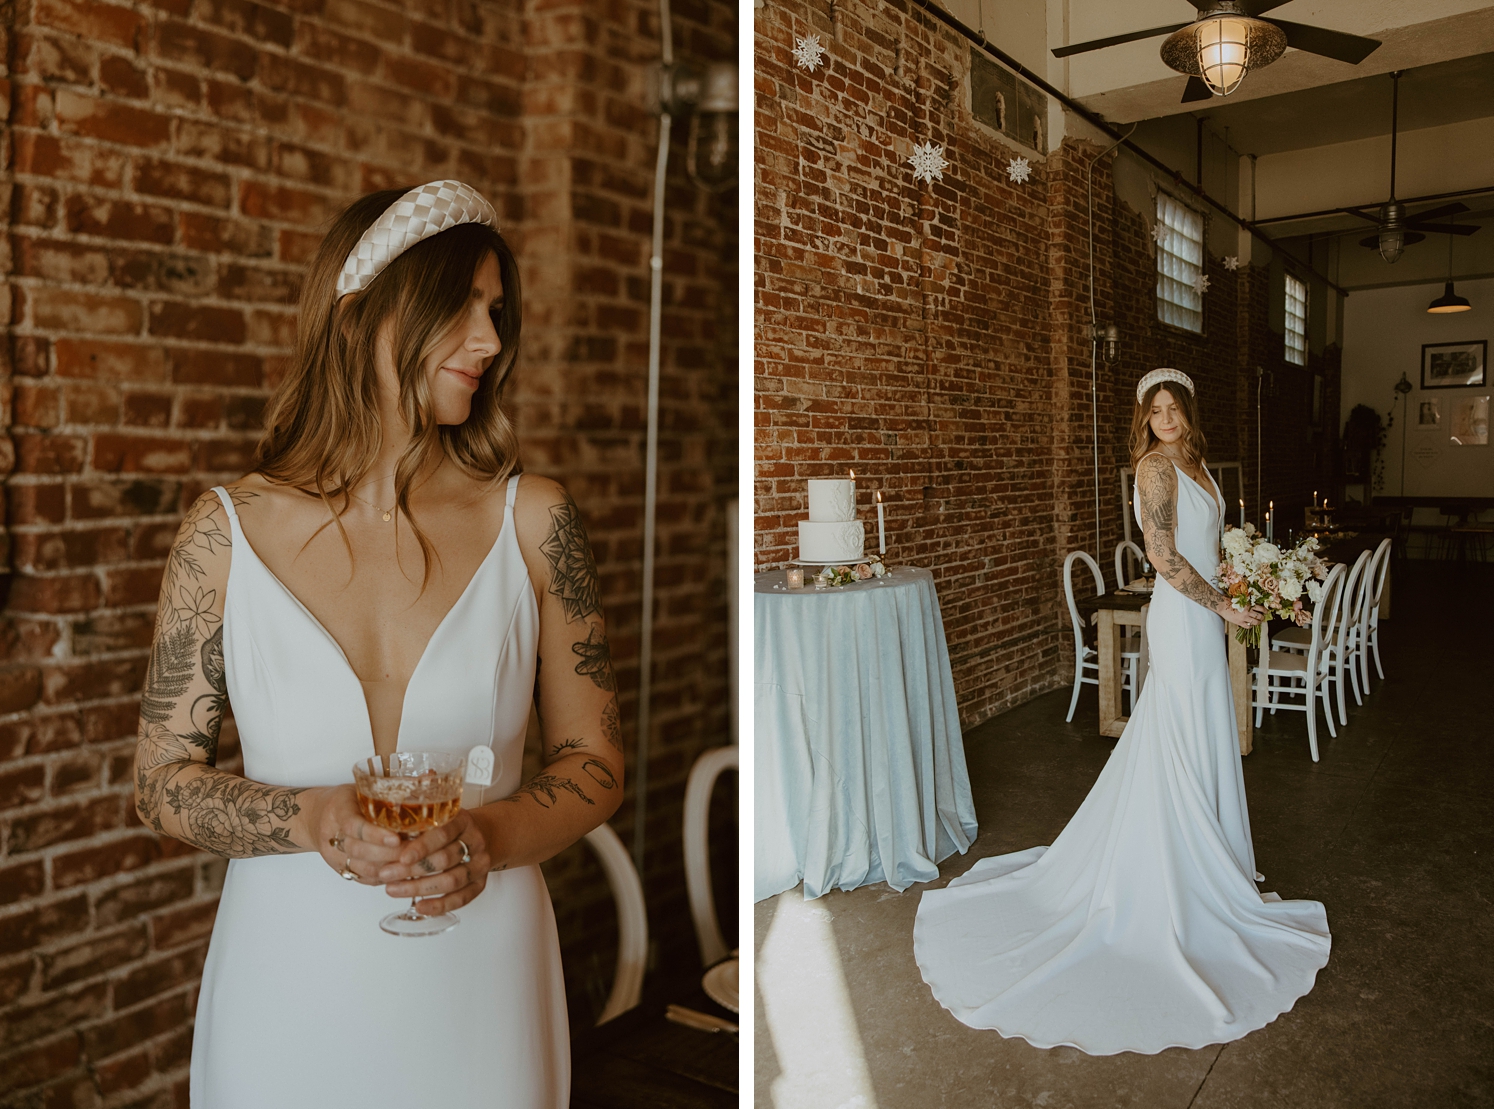 Bride looking down while holding glass of champagne | bride looking over shoulder with train spread out behind her | McArthur Weddings and Events